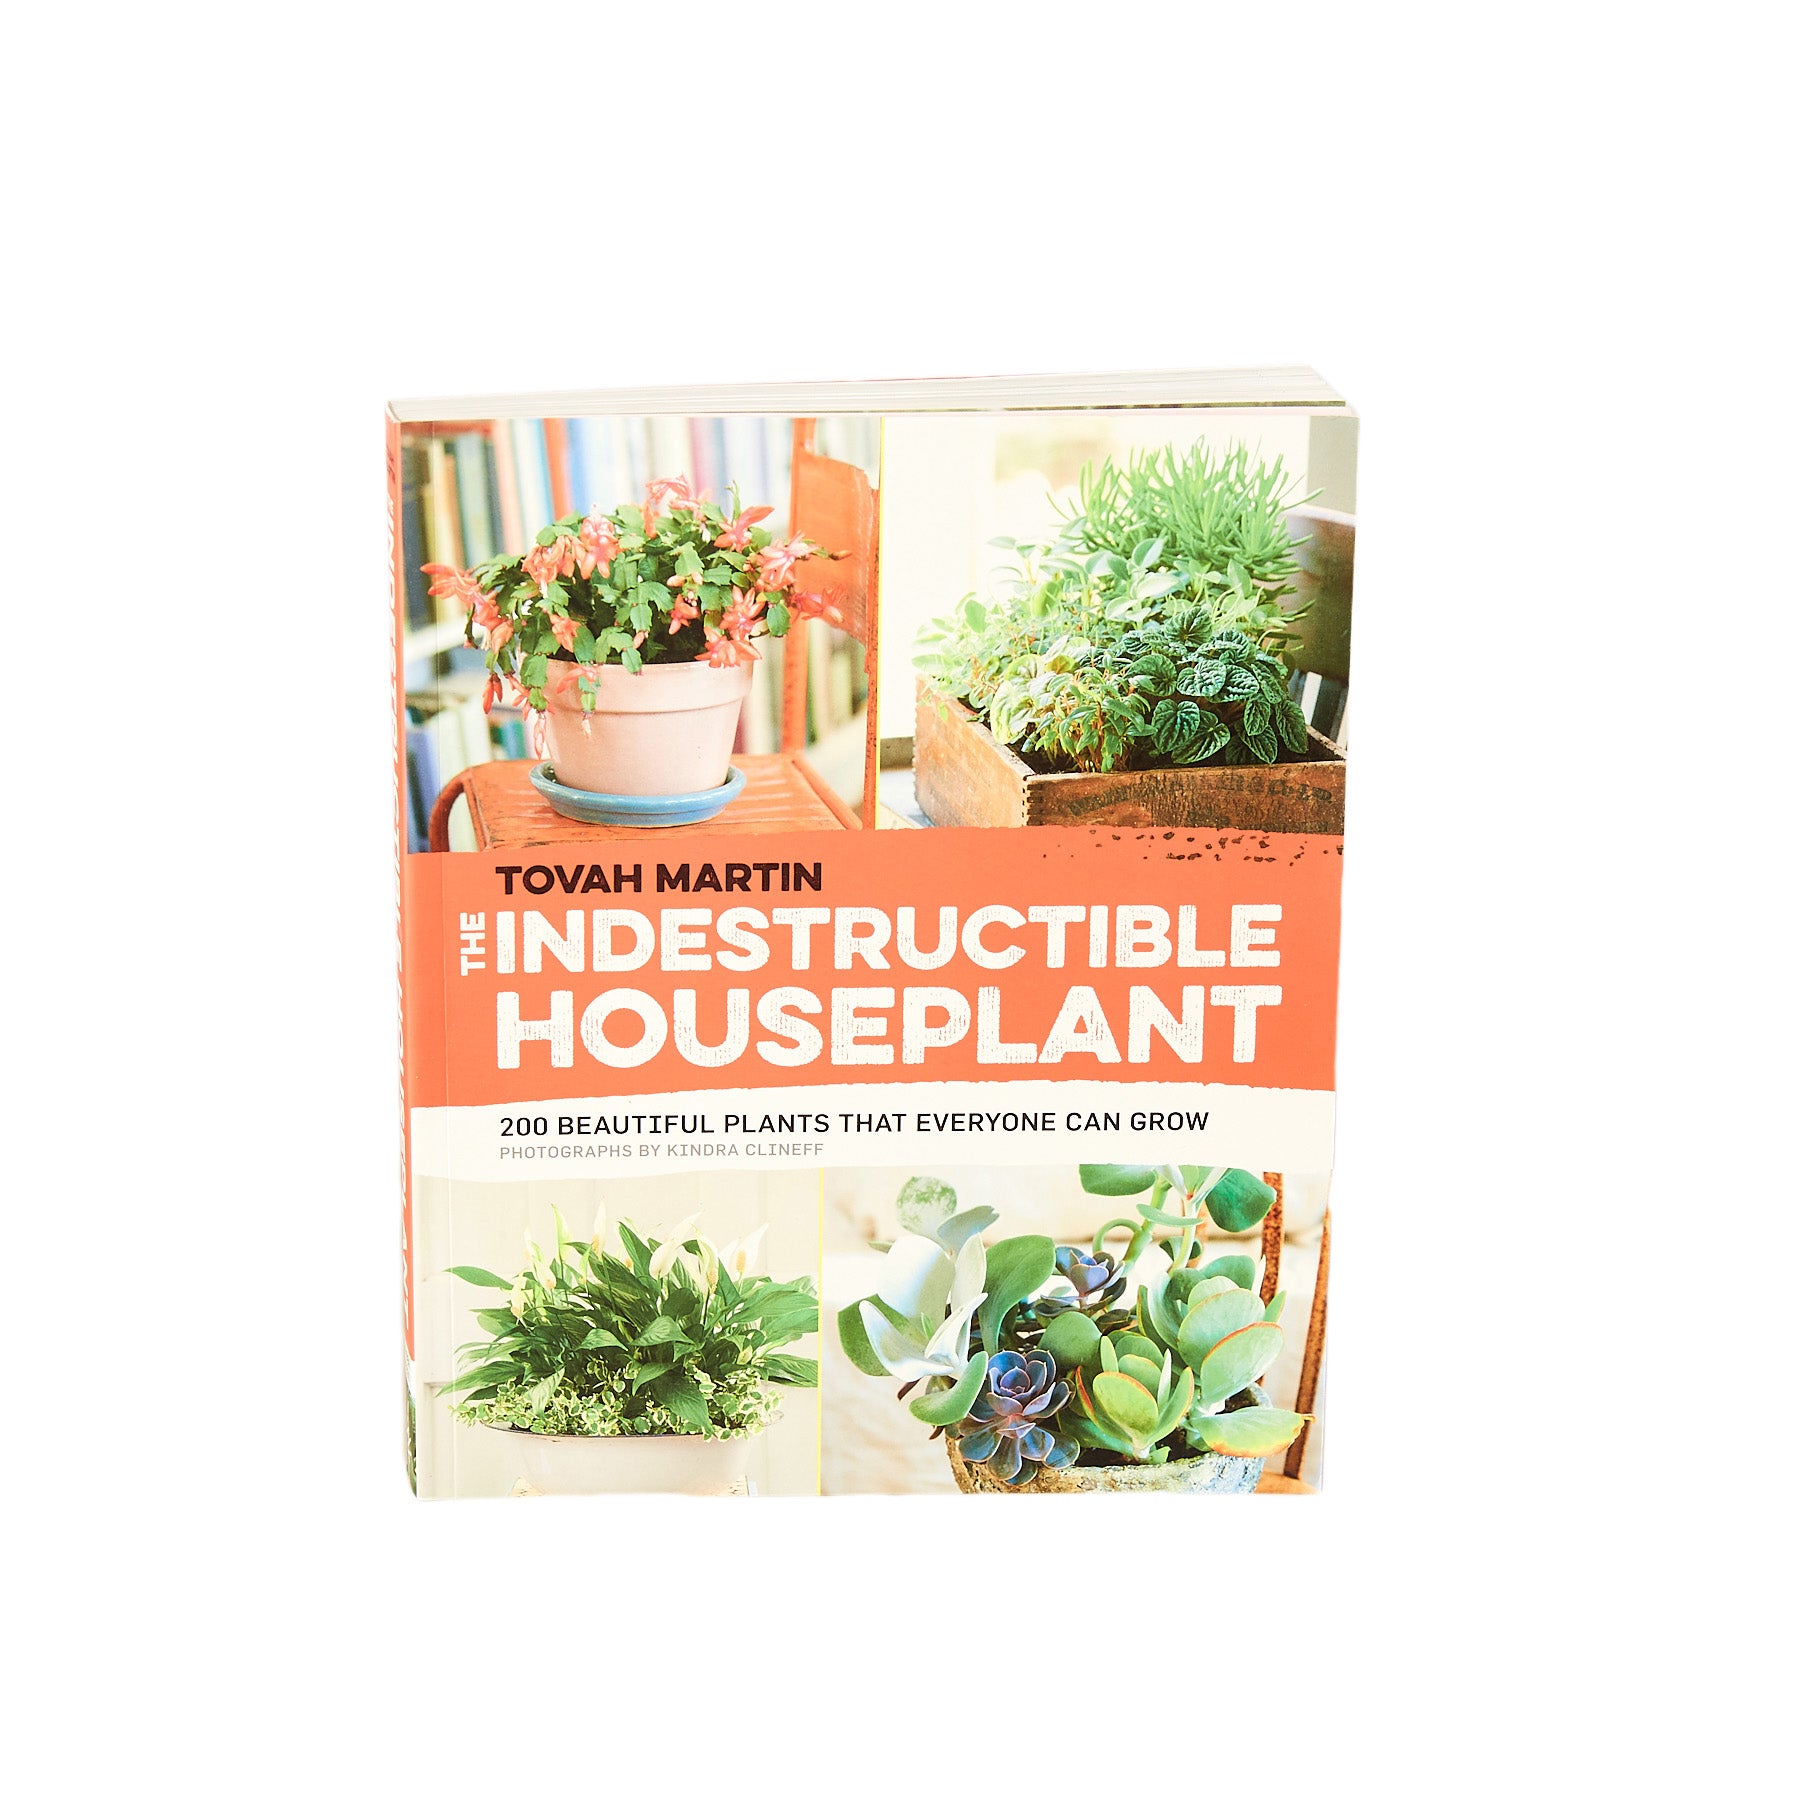 Discover the wonders of Tom Martin's indestructible houseplant at one of the top garden centers near me.